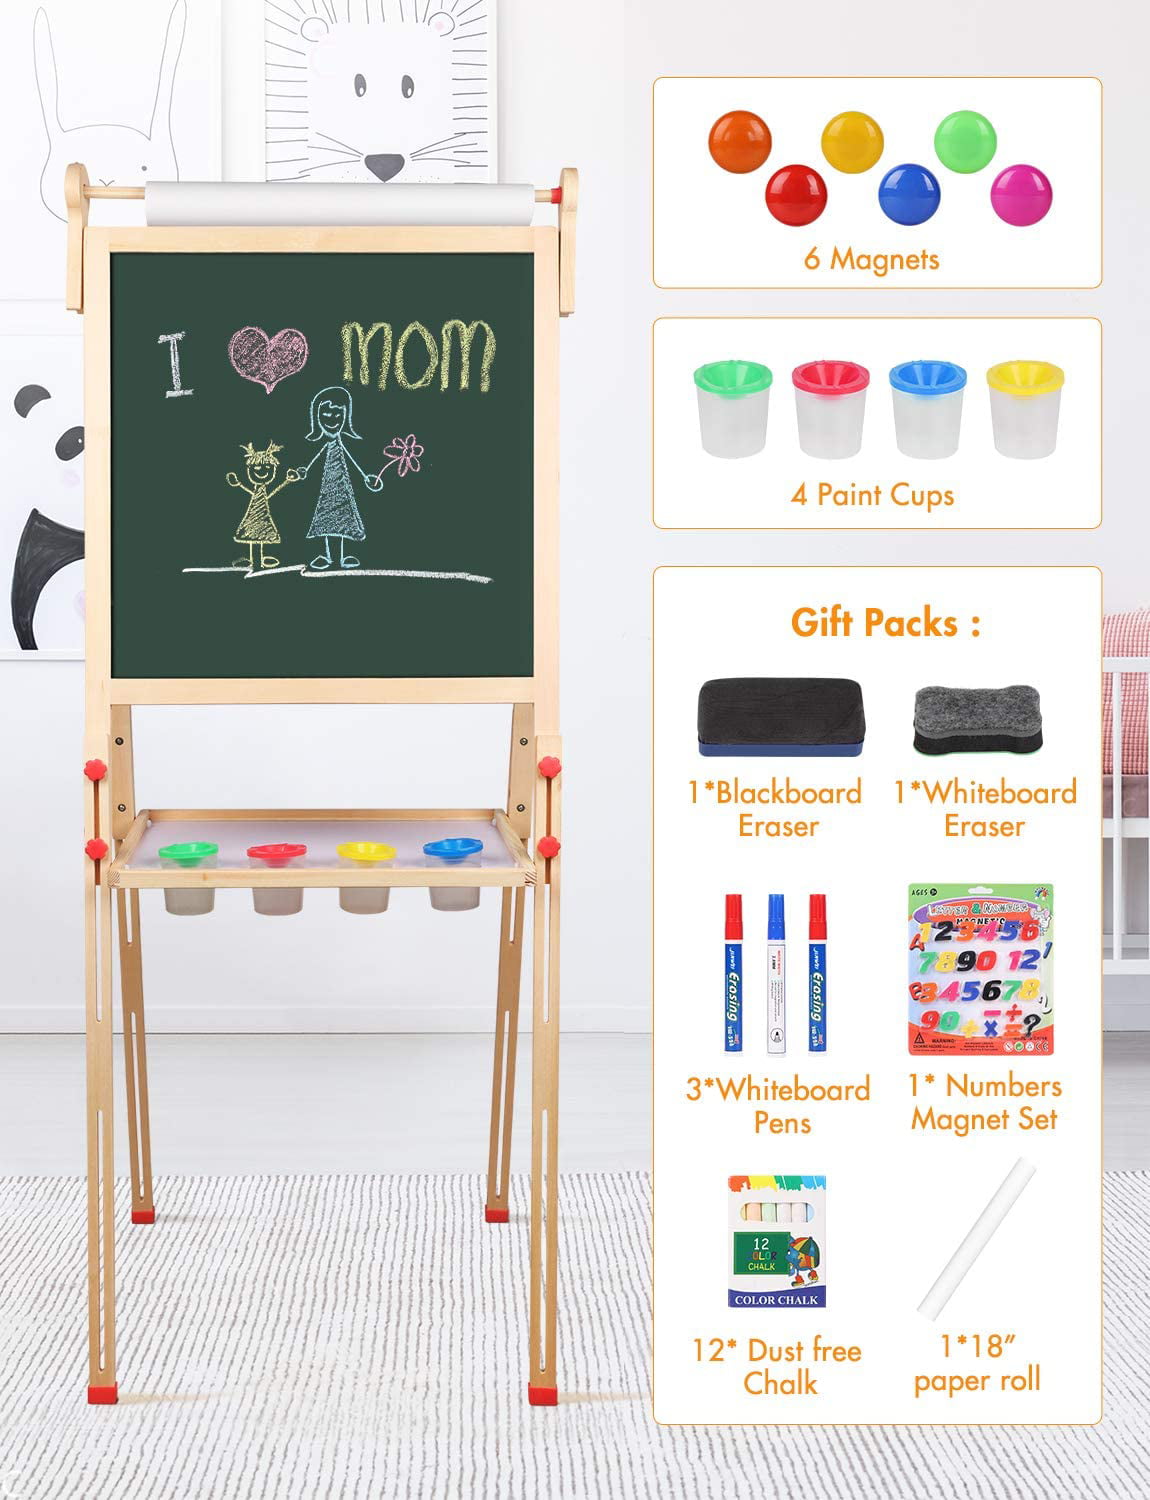 YOHOOLYO Kids Wooden Art Easel with Paper Roll Double Sided Whiteboard Chalkboard Children Easel,Adjustable Height Magnetic Dry Easel Drawing with Kids Art Easel Playset for Boys Girls Gifts